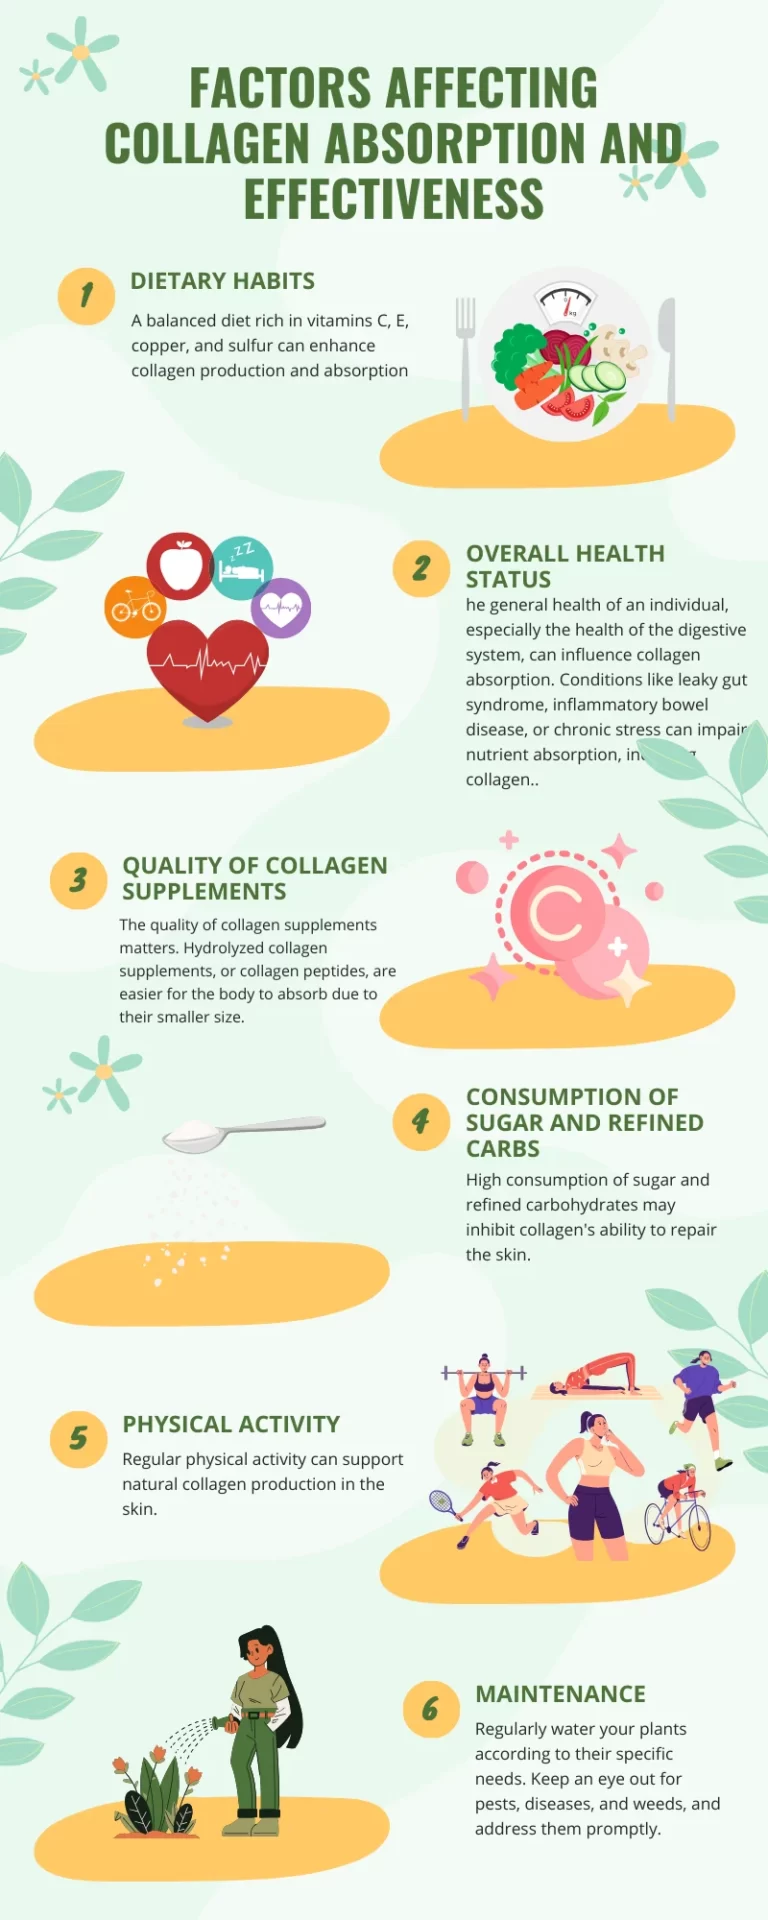 Factors Affecting Collagen Absorption and Effectiveness